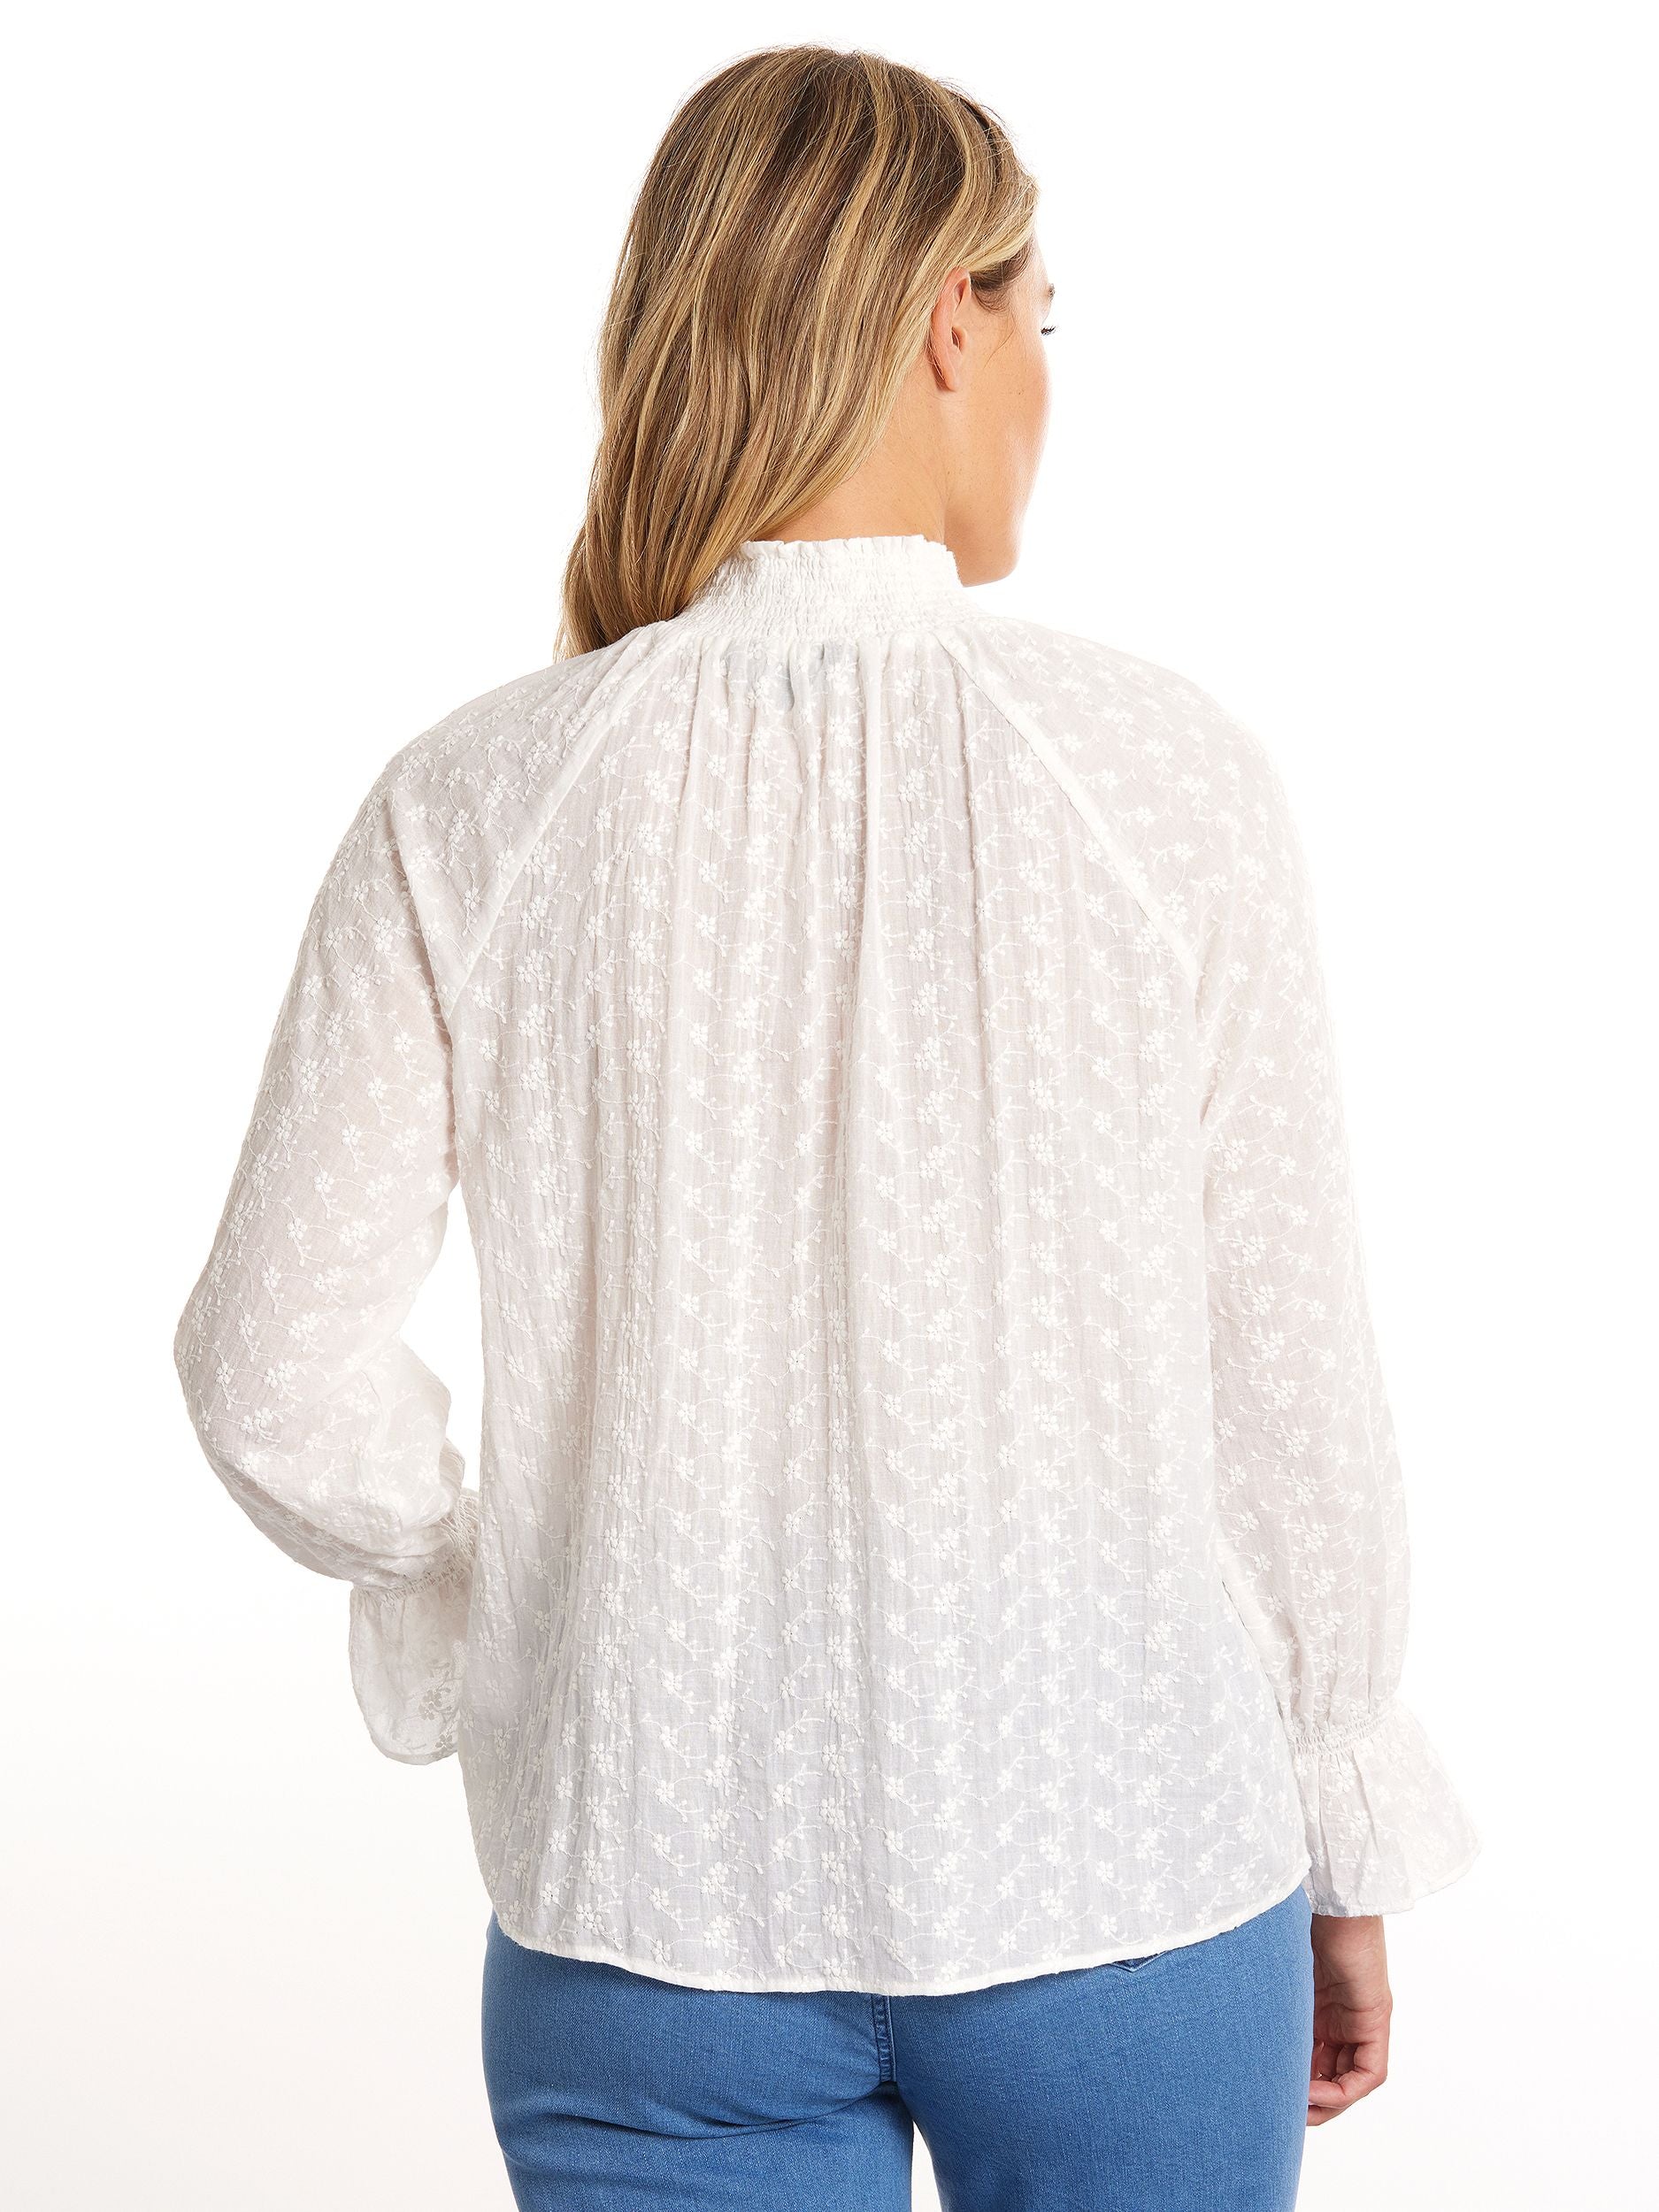 EMBROIDERED Blouse